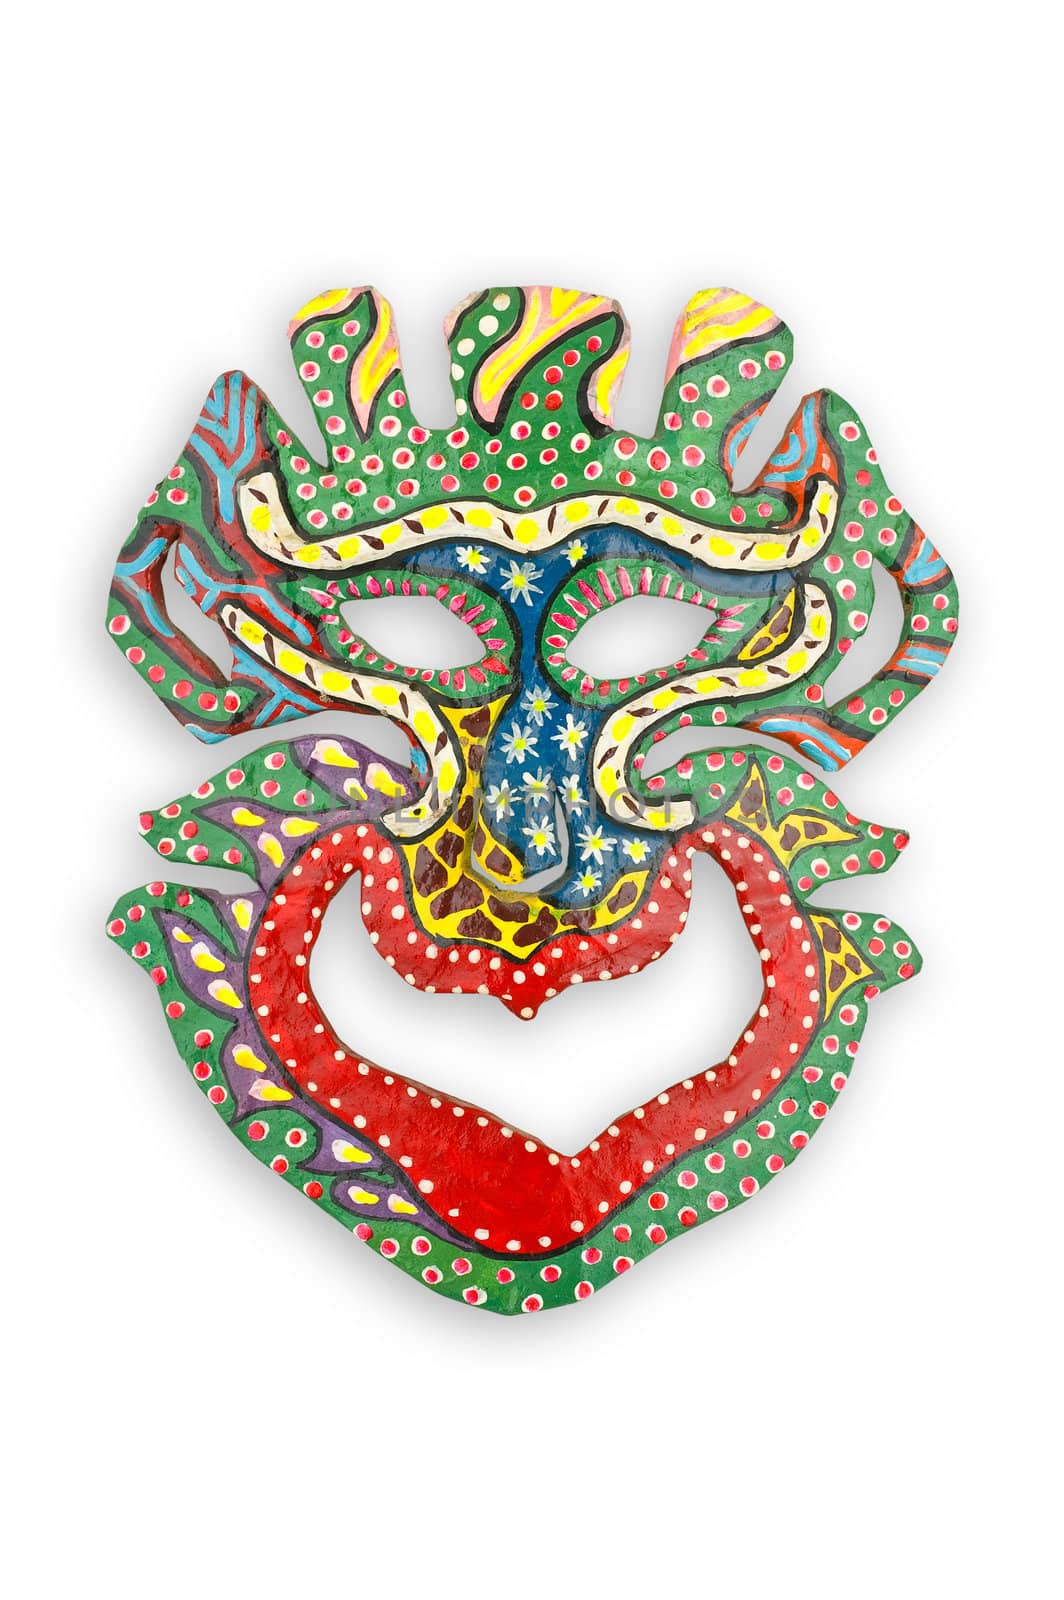 Traditional cuban mask on white background, clipping path.